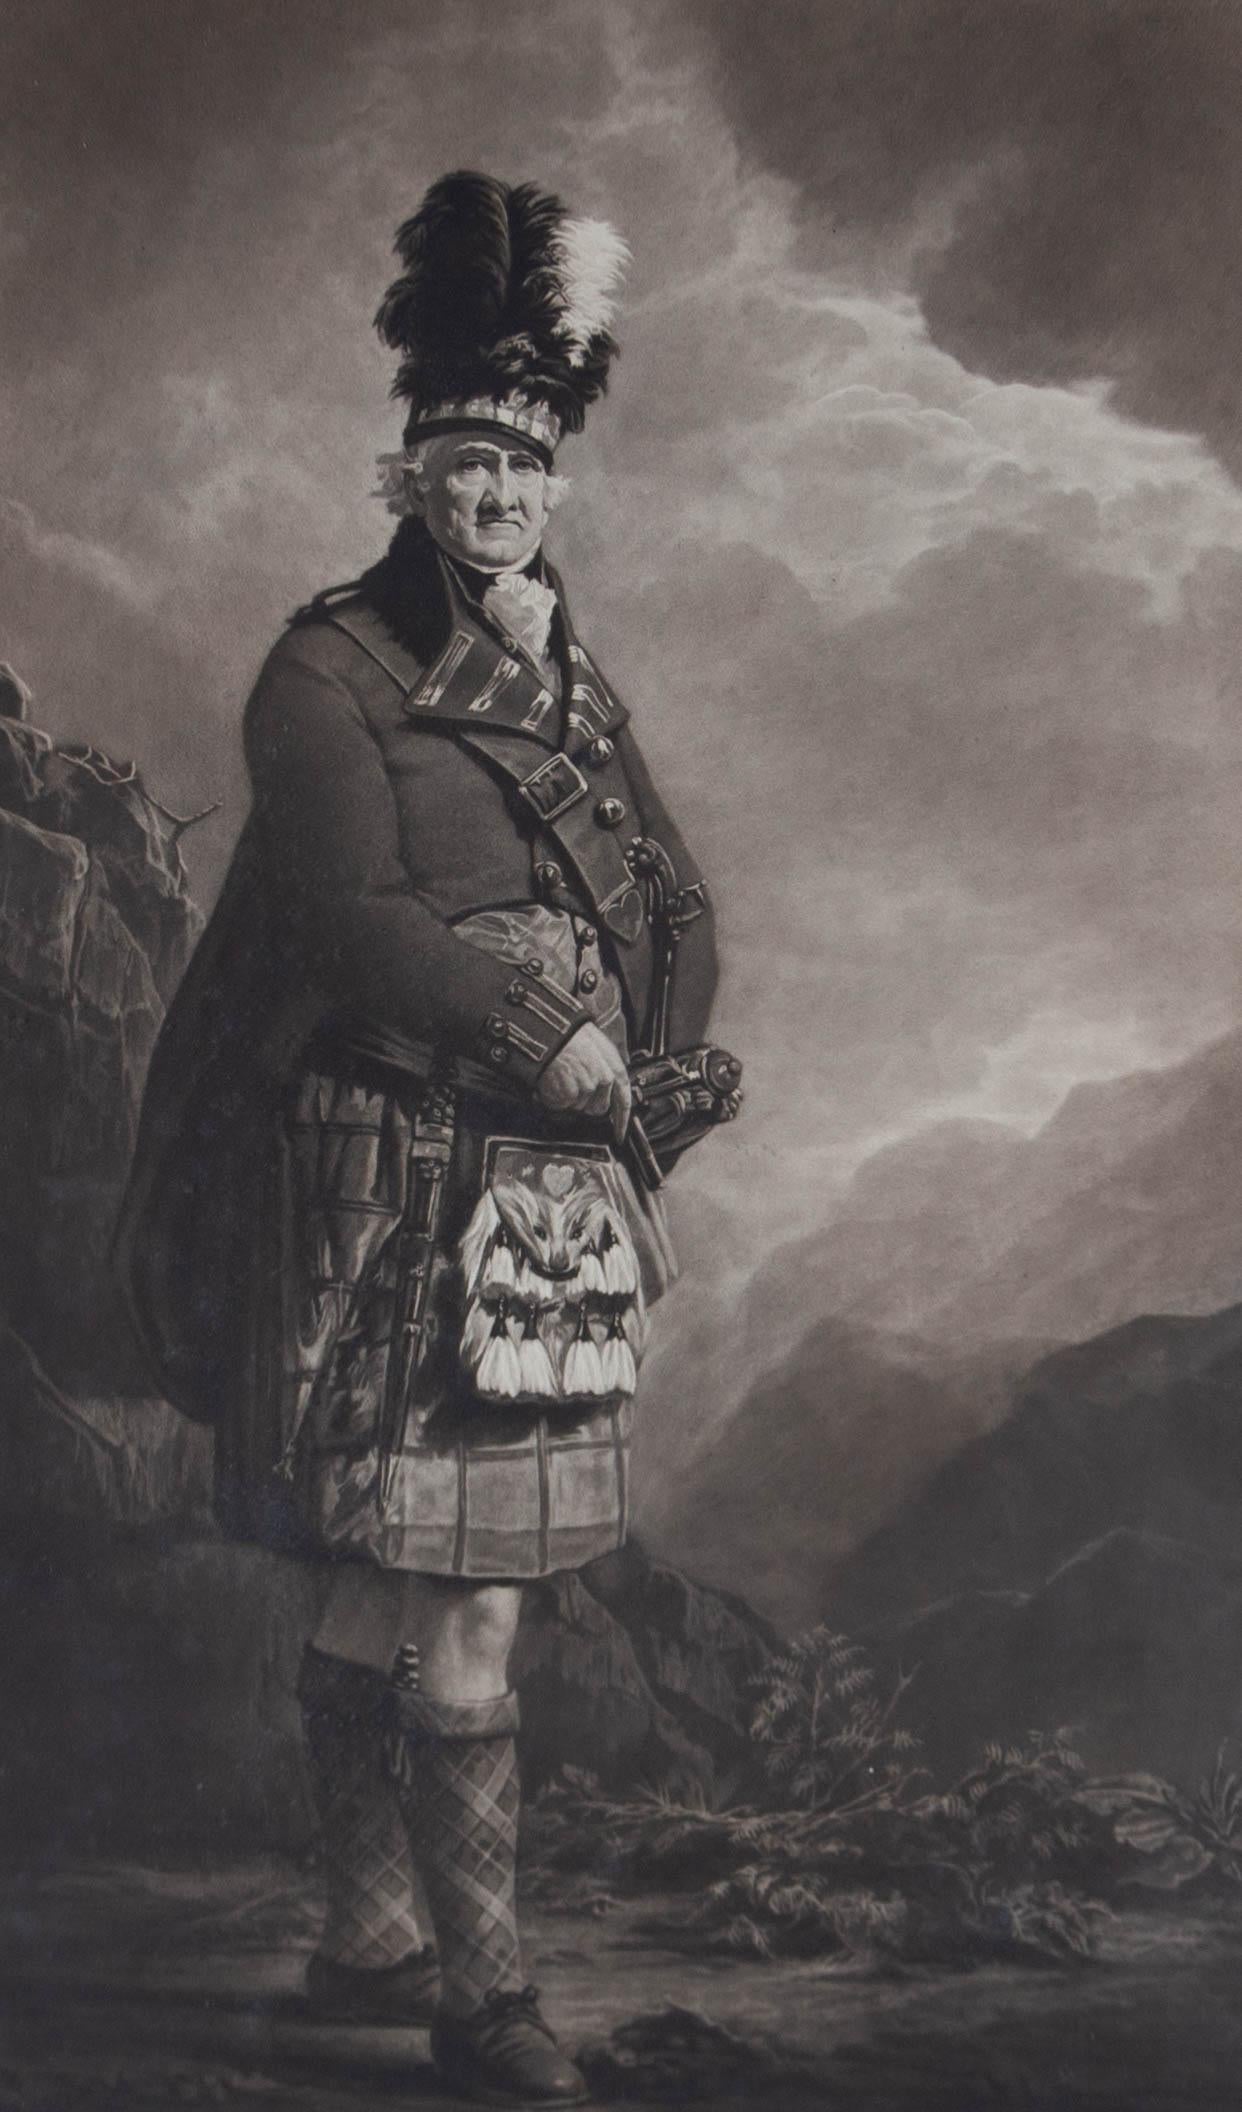 A mezzotint after Sir Henry Raeburn RA RSA FRSE's (1756-1823) oil portrait 'The MacNab' (1802), depicting Francis Macnab ('The Macnab'), 12th Laird of Macnab (1734-1816). Presented glazed in a cream wash line mount and a black wooden frame.